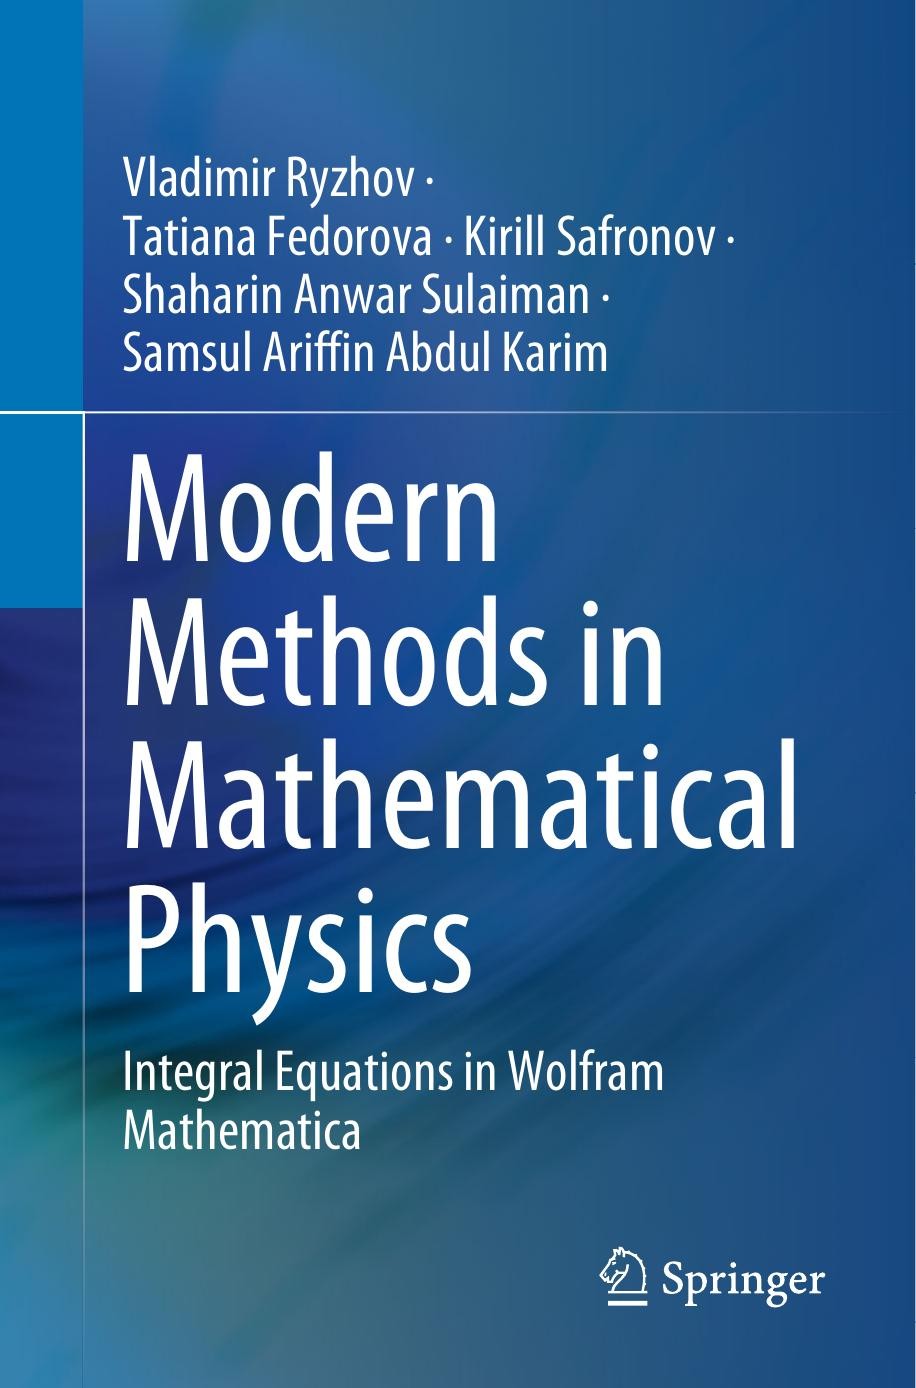 Modern Methods in Mathematical Physics: Integral Equations in Wolfram Mathematica